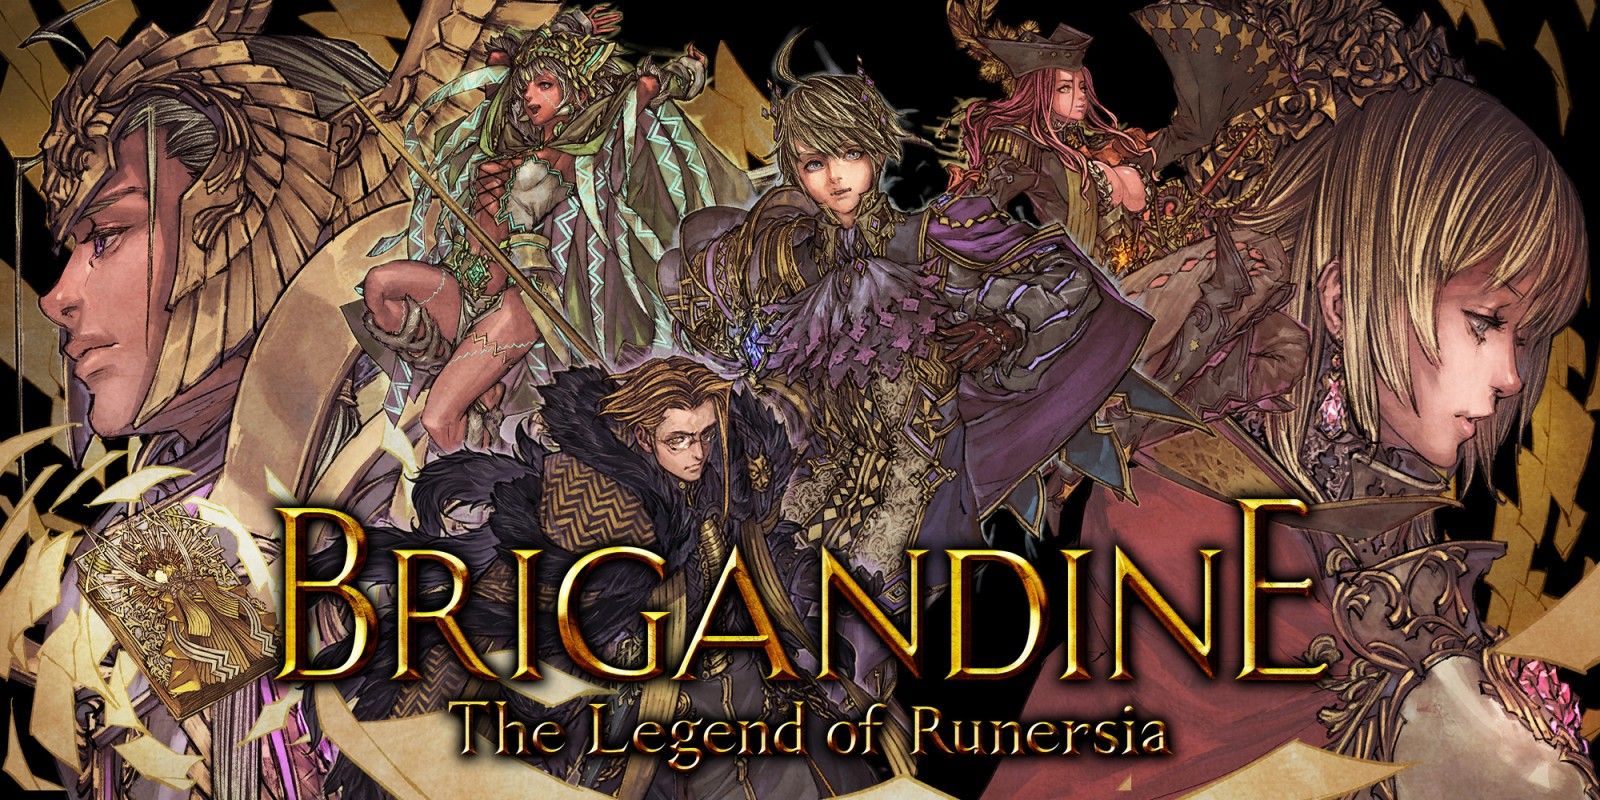 Brigandine is an accessible yet challenging Grand strategy RPG